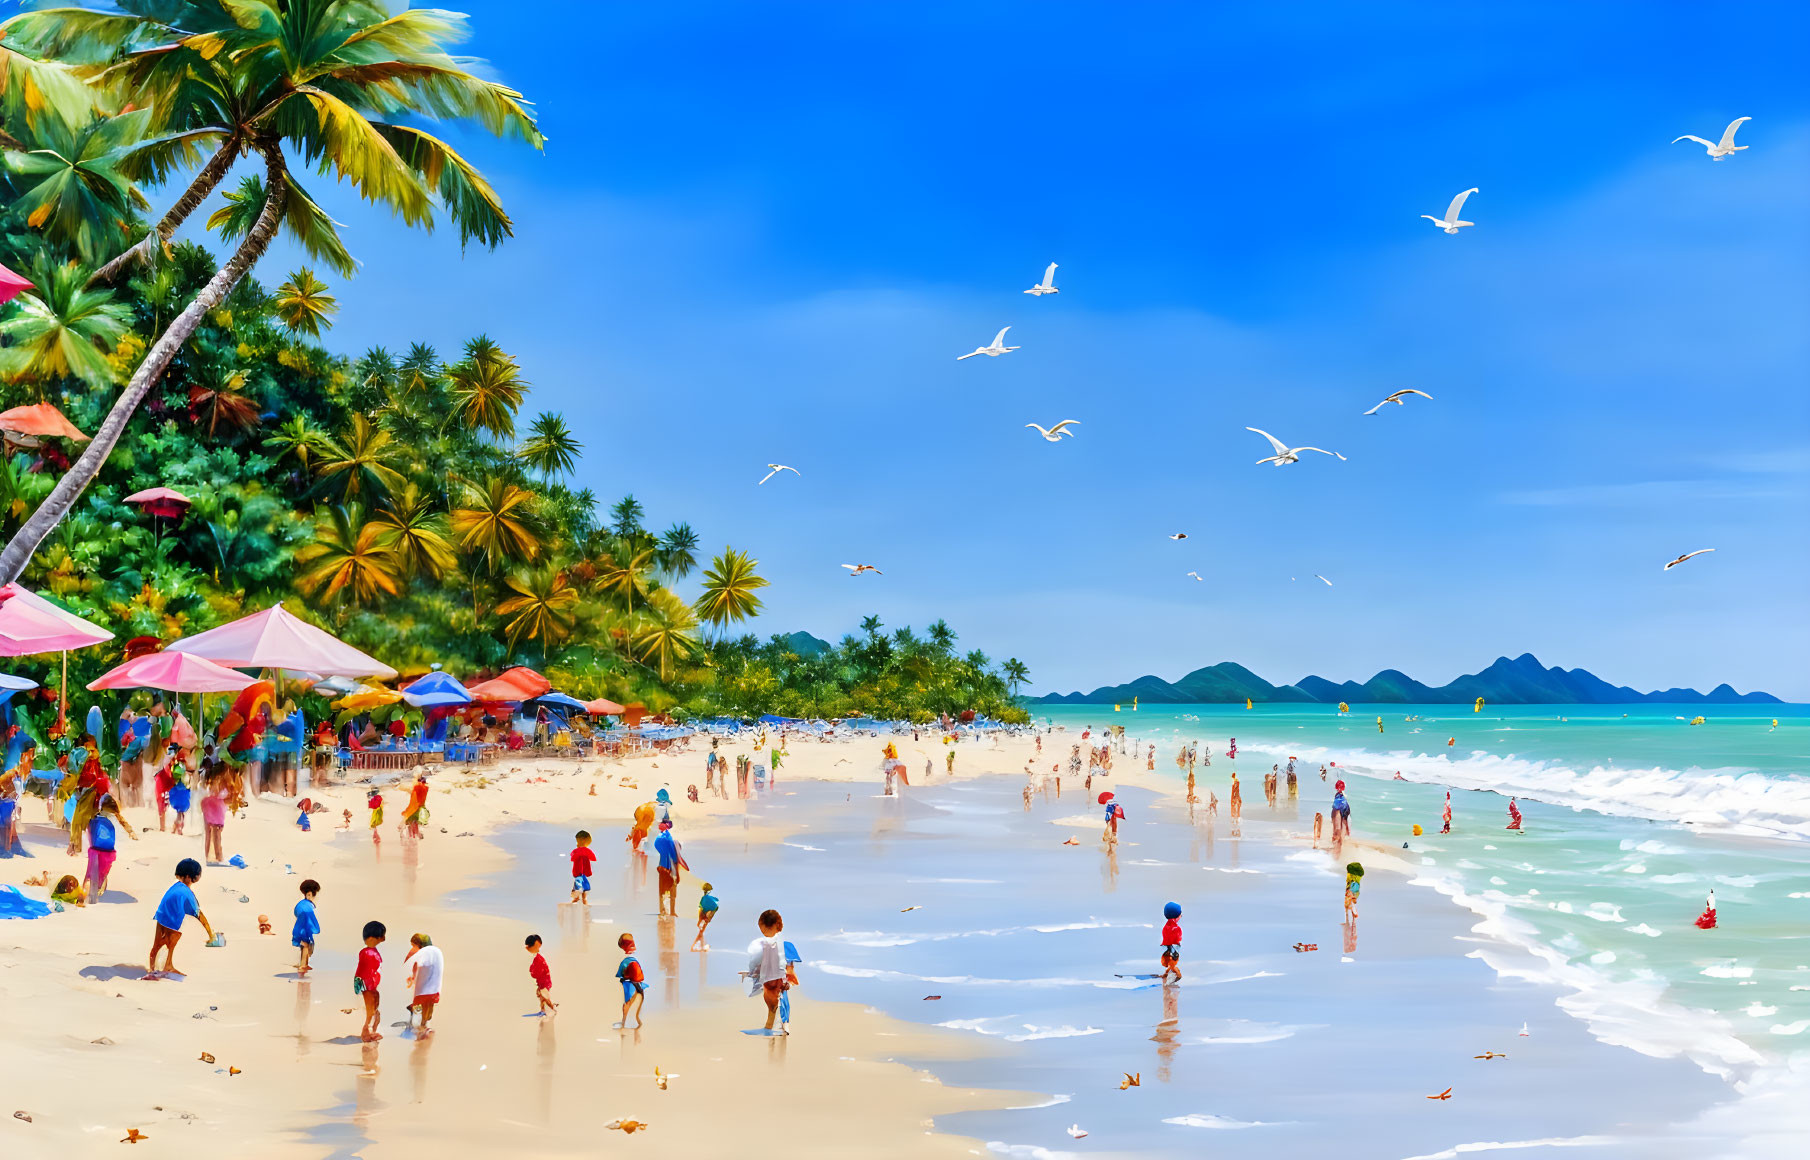 Beach scene with strolling people, flying seagulls, palm trees, and blue sky